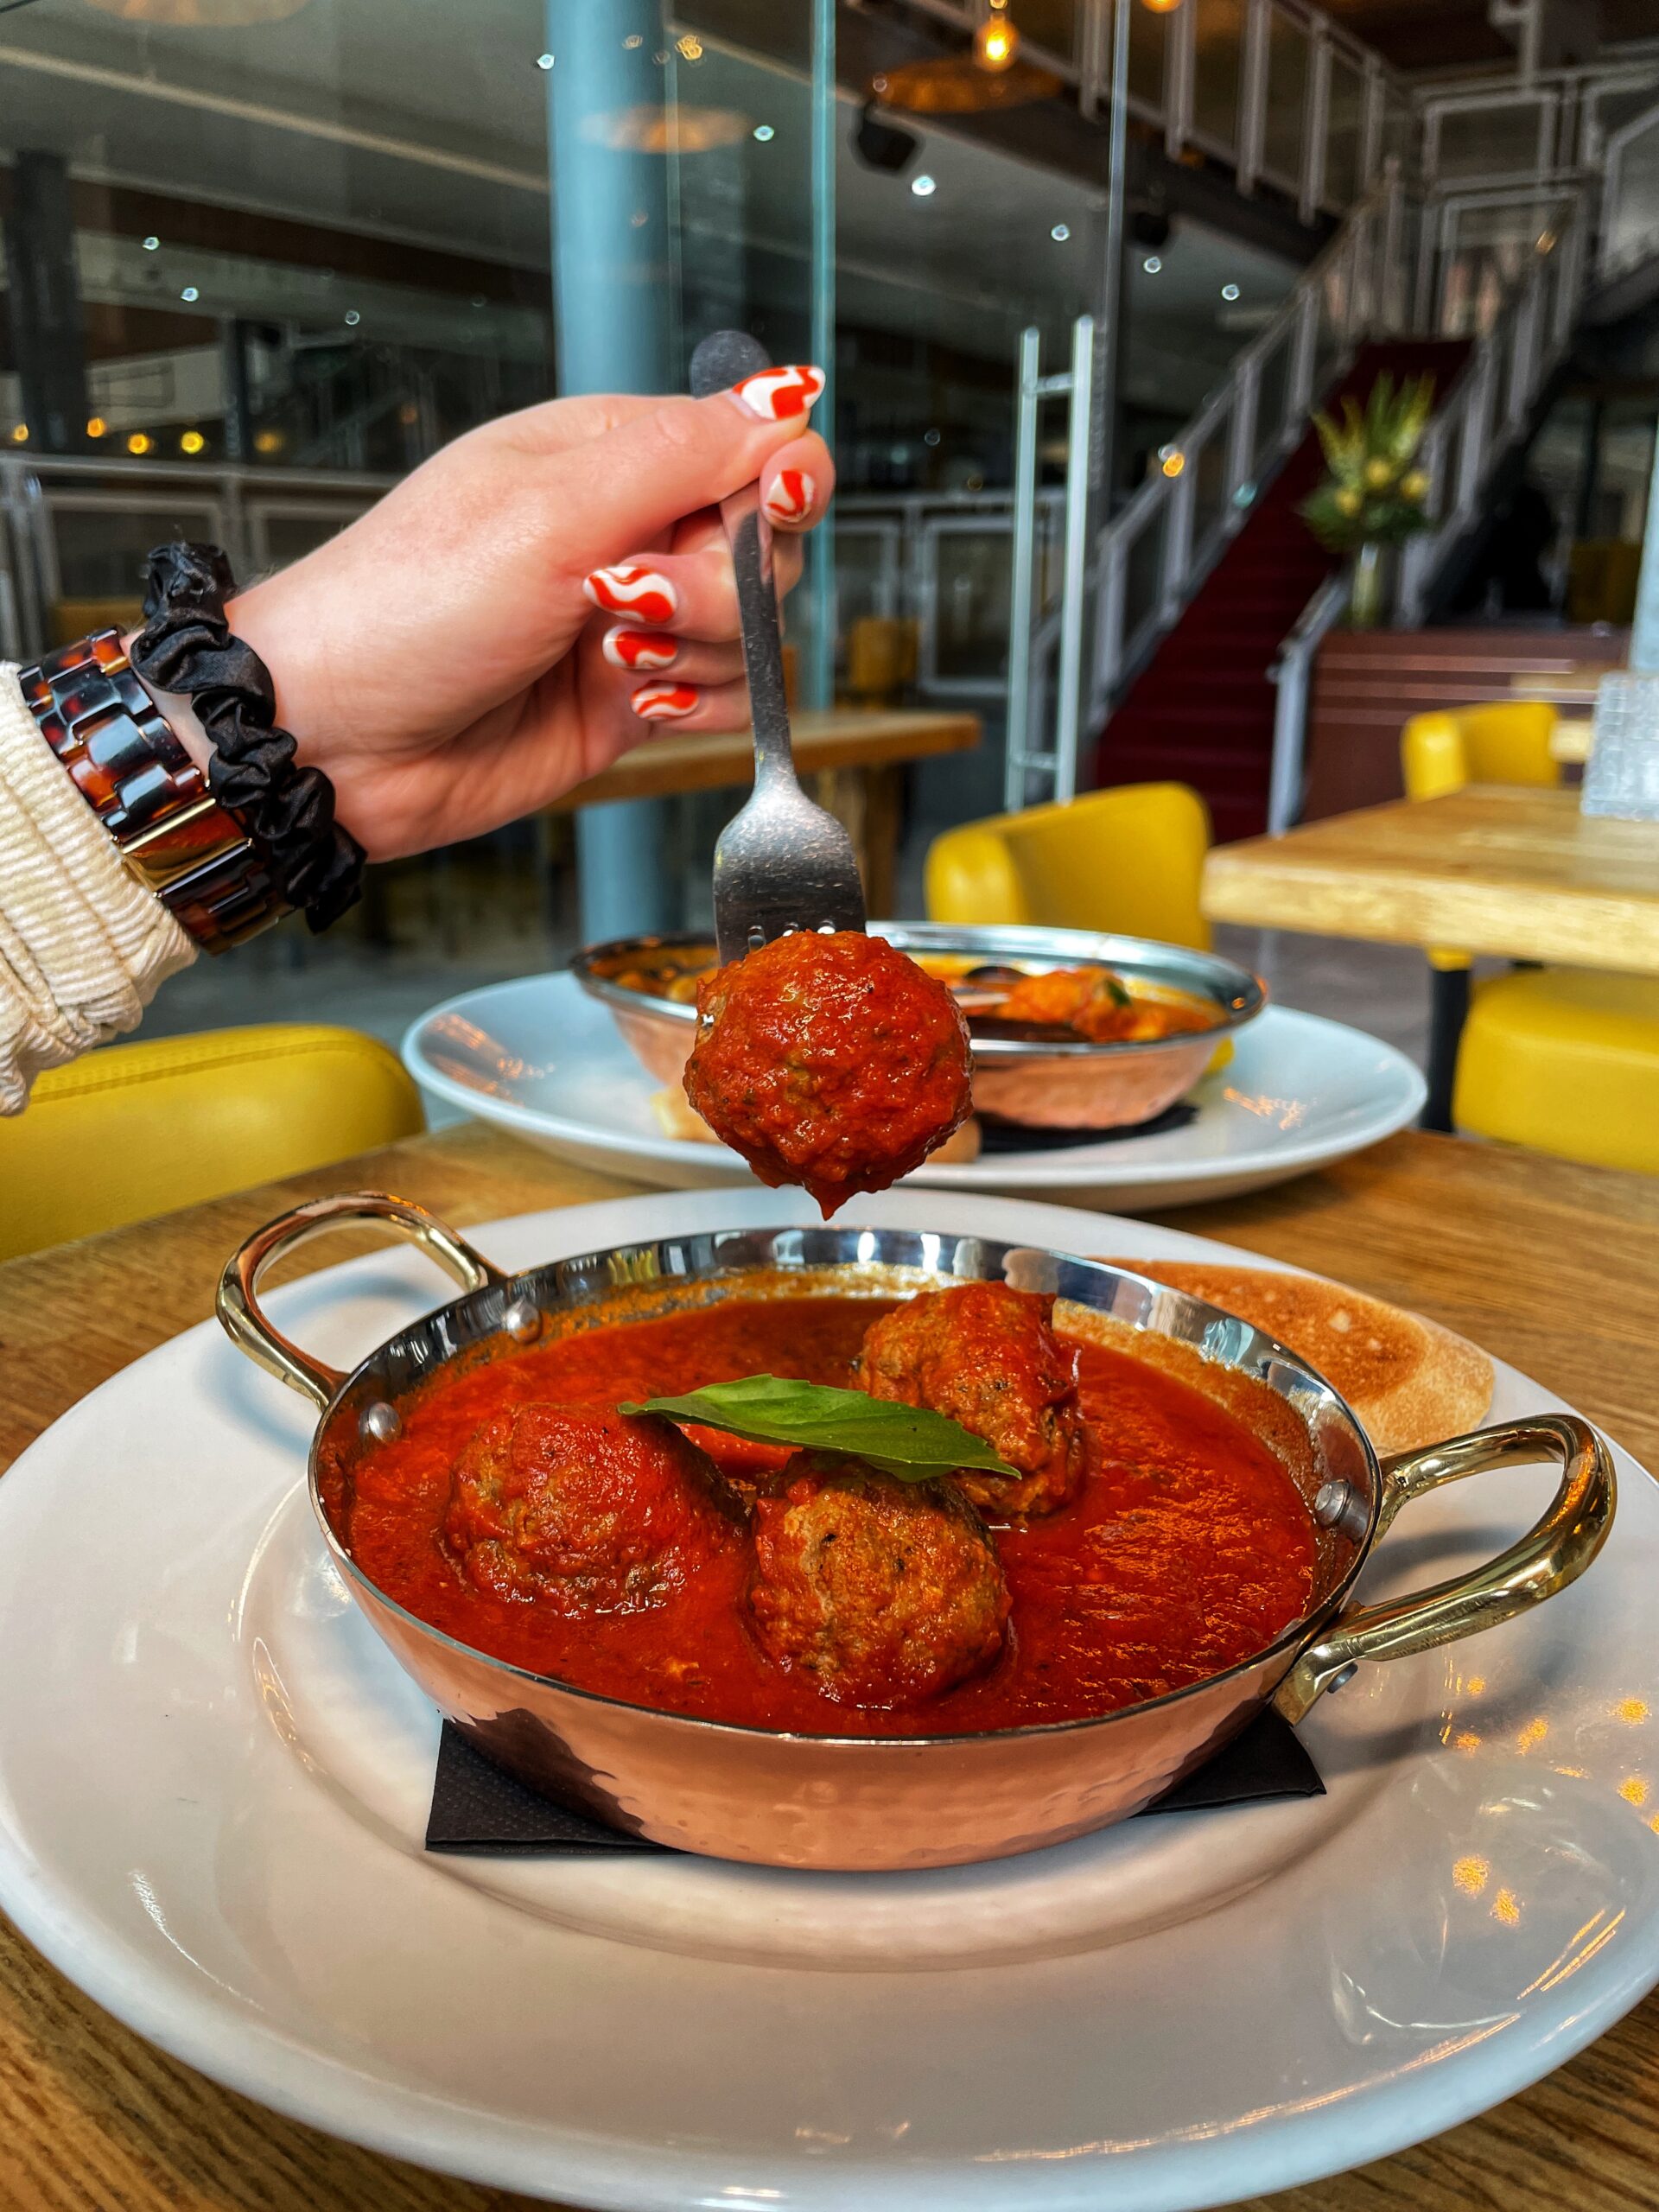 Meatballs at Italiana Fifty-Five. Credit: The Manc Group